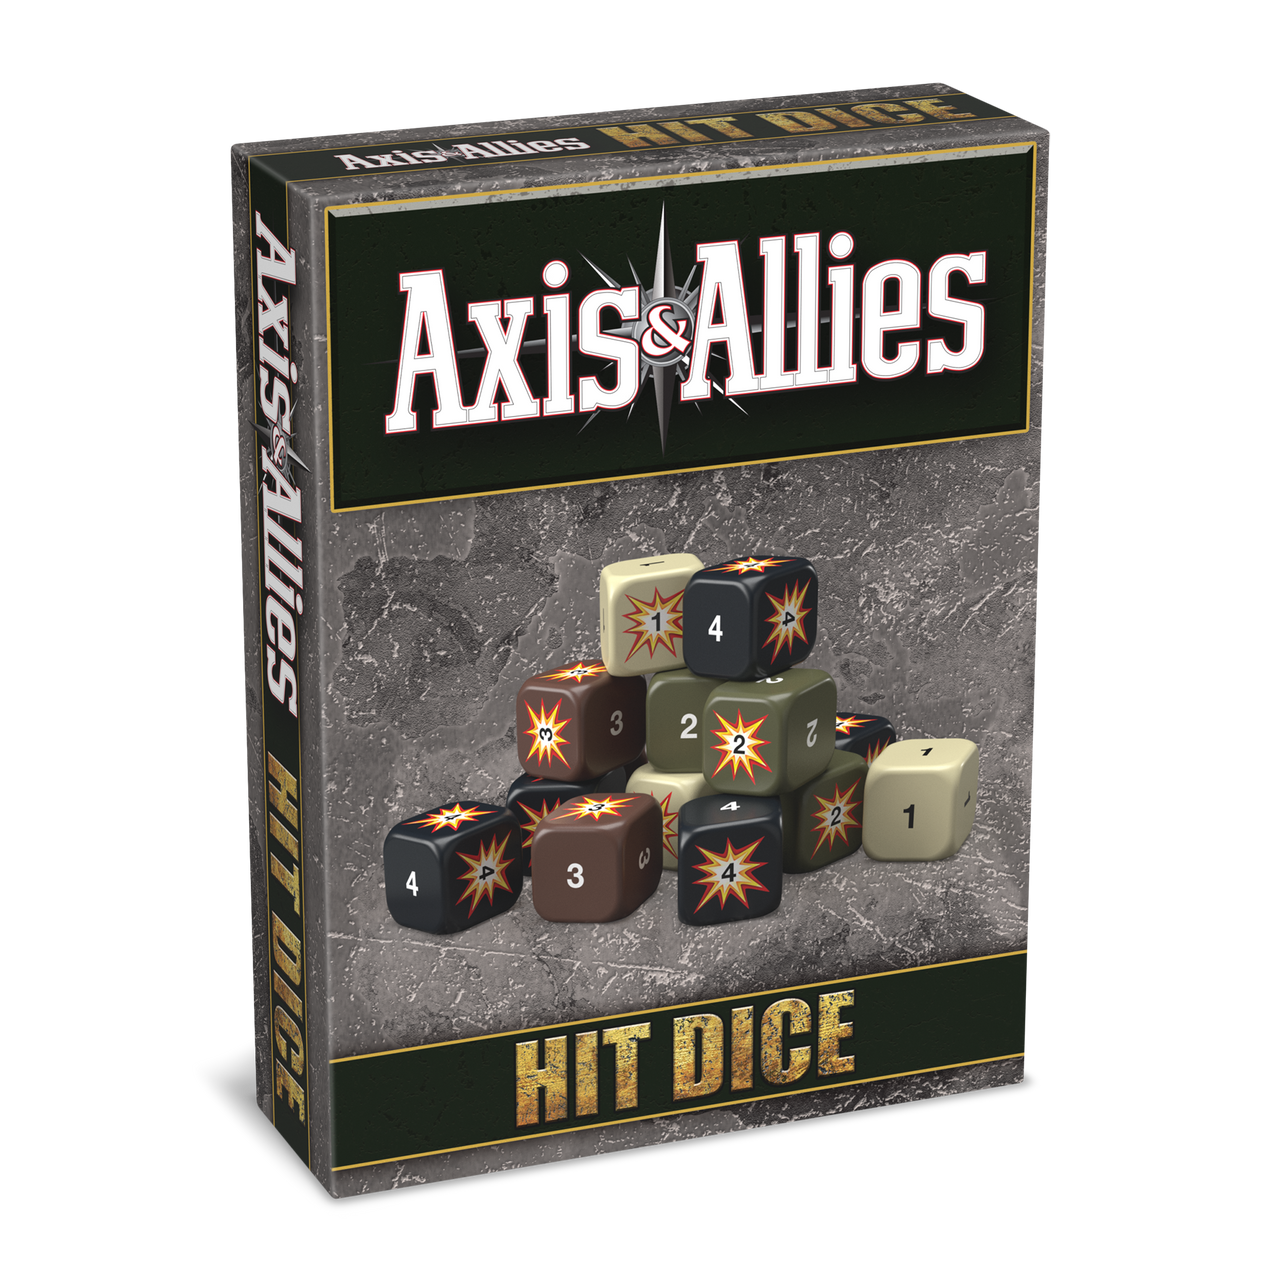 RGS02690-Axis-Allies-HitDice-box-2000px-shadow-3D-v2024__31012.png